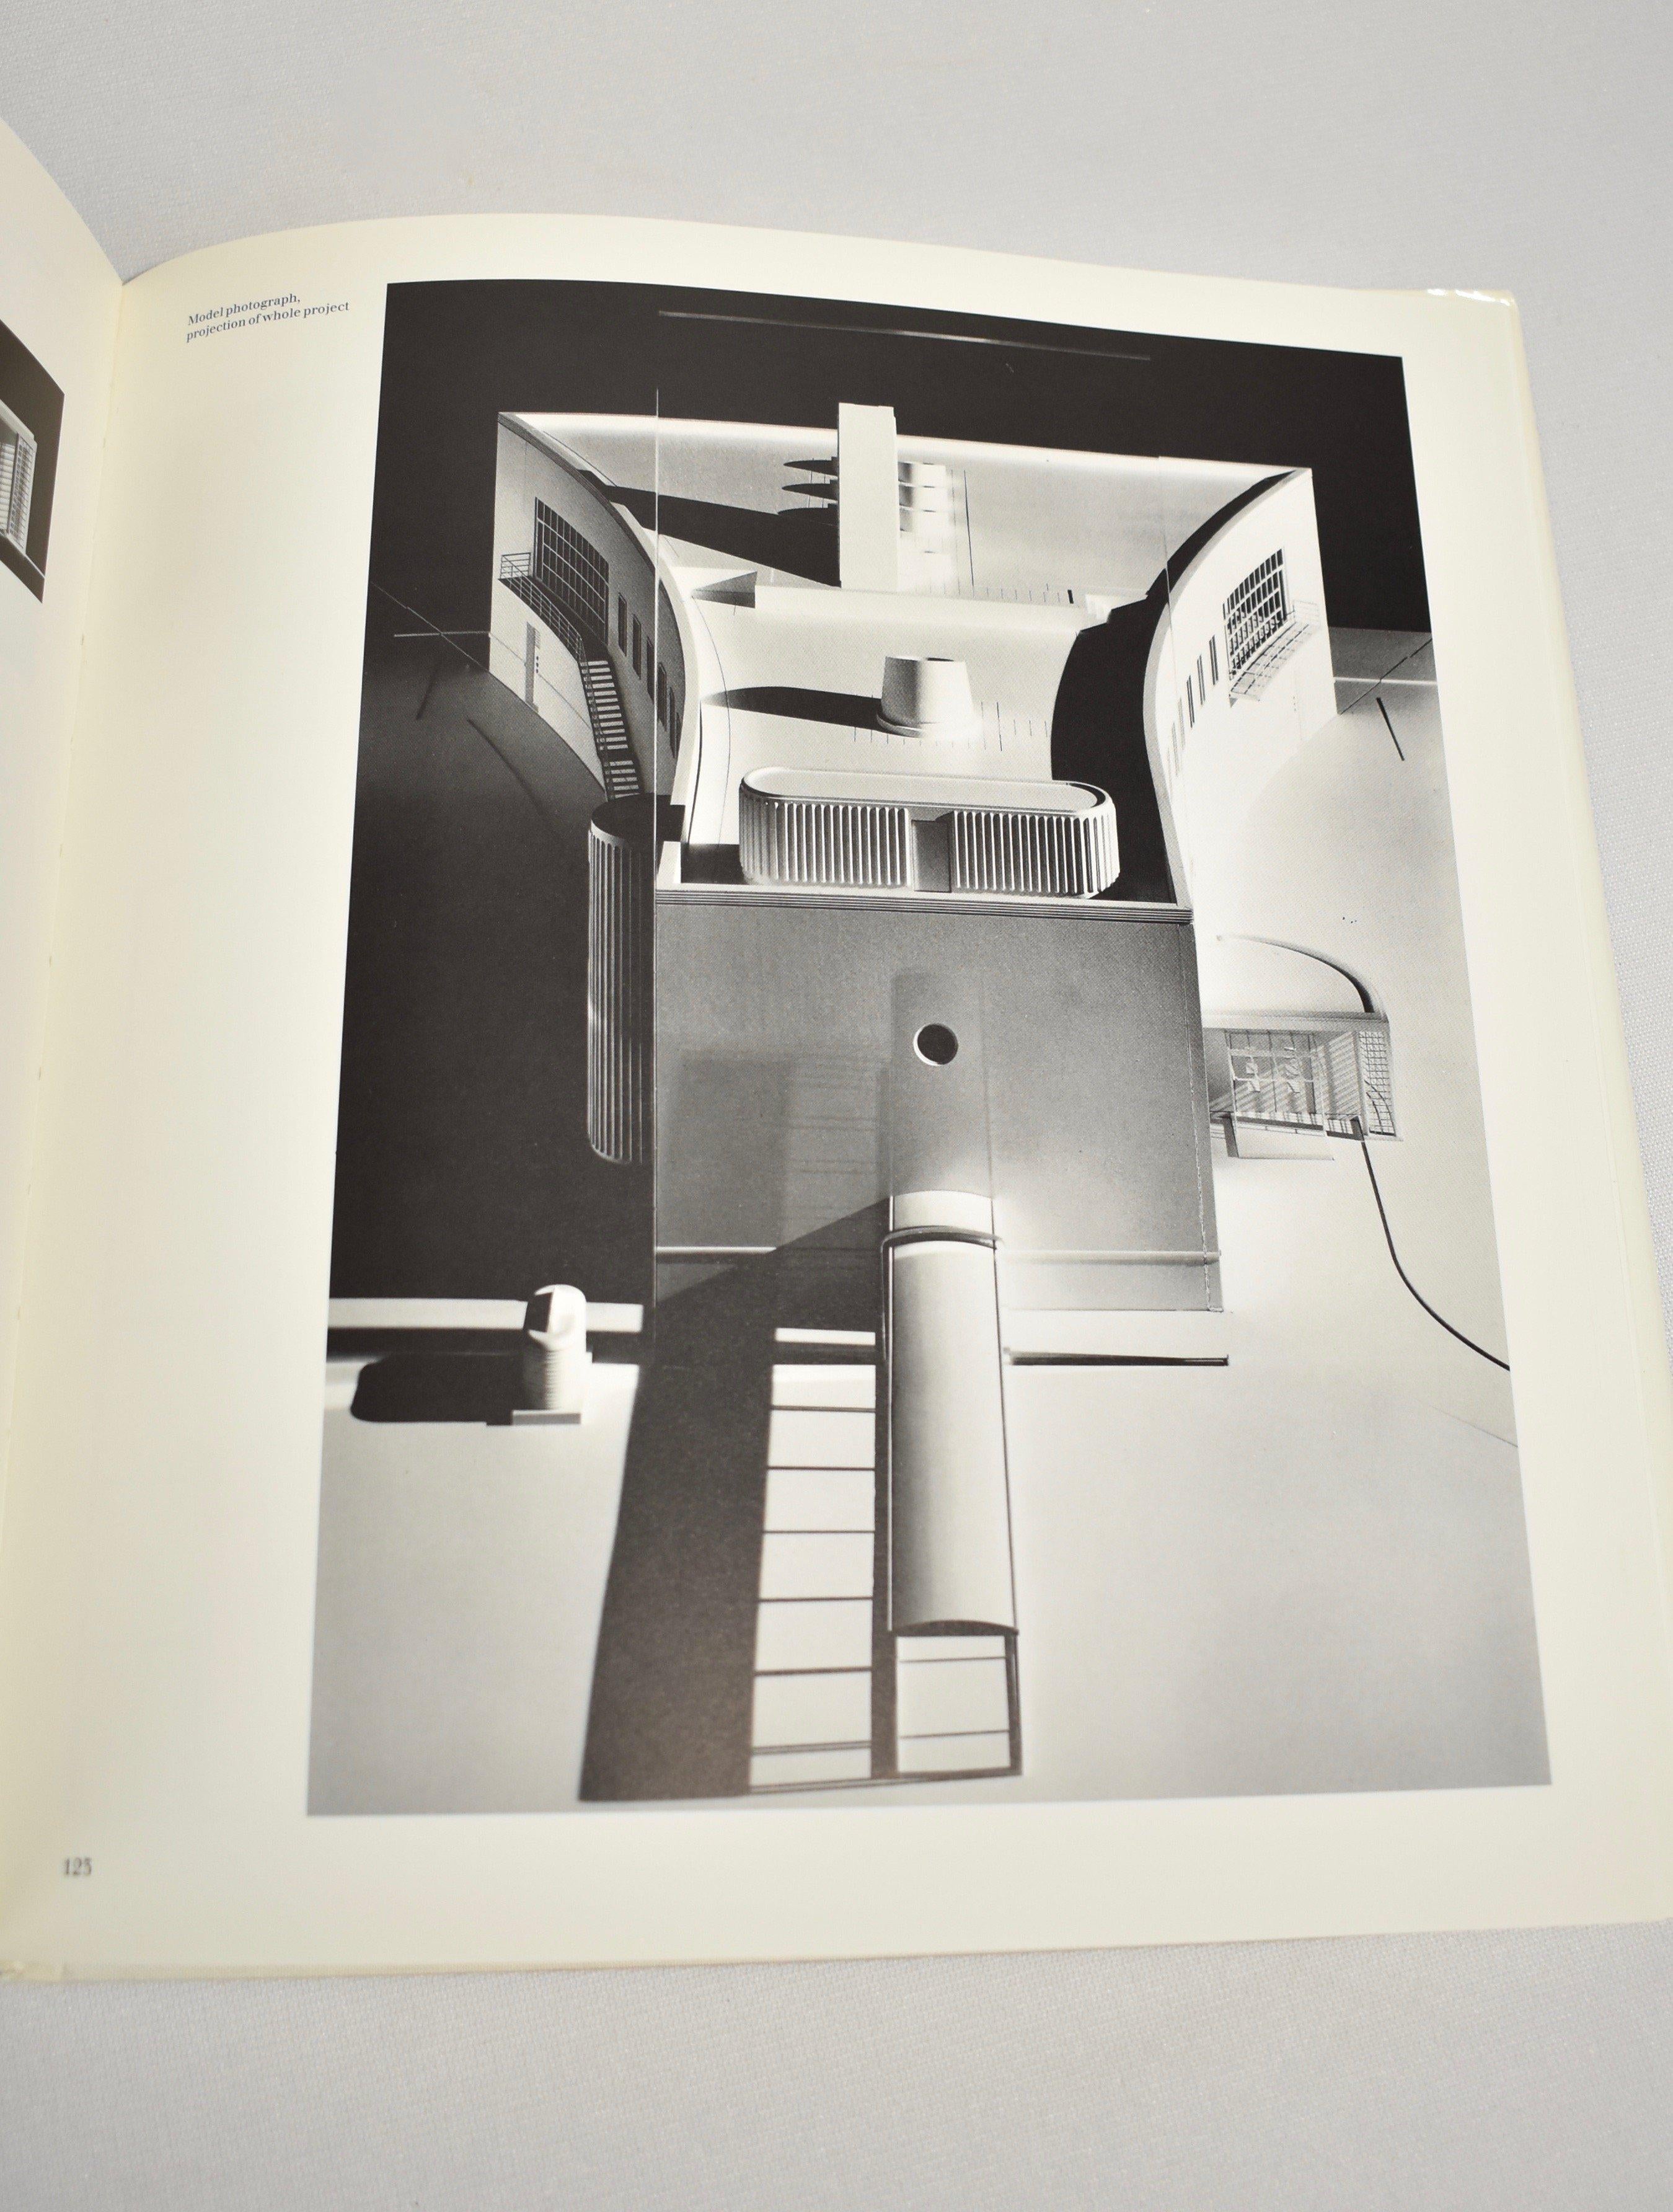 Gustav Peichl : Buildings and Projects, a hardback coffee table book featuring the work of architect Gustav Peichl. By Verlag Gerd Hatje, published in 1992. First edition, 223 pages.

